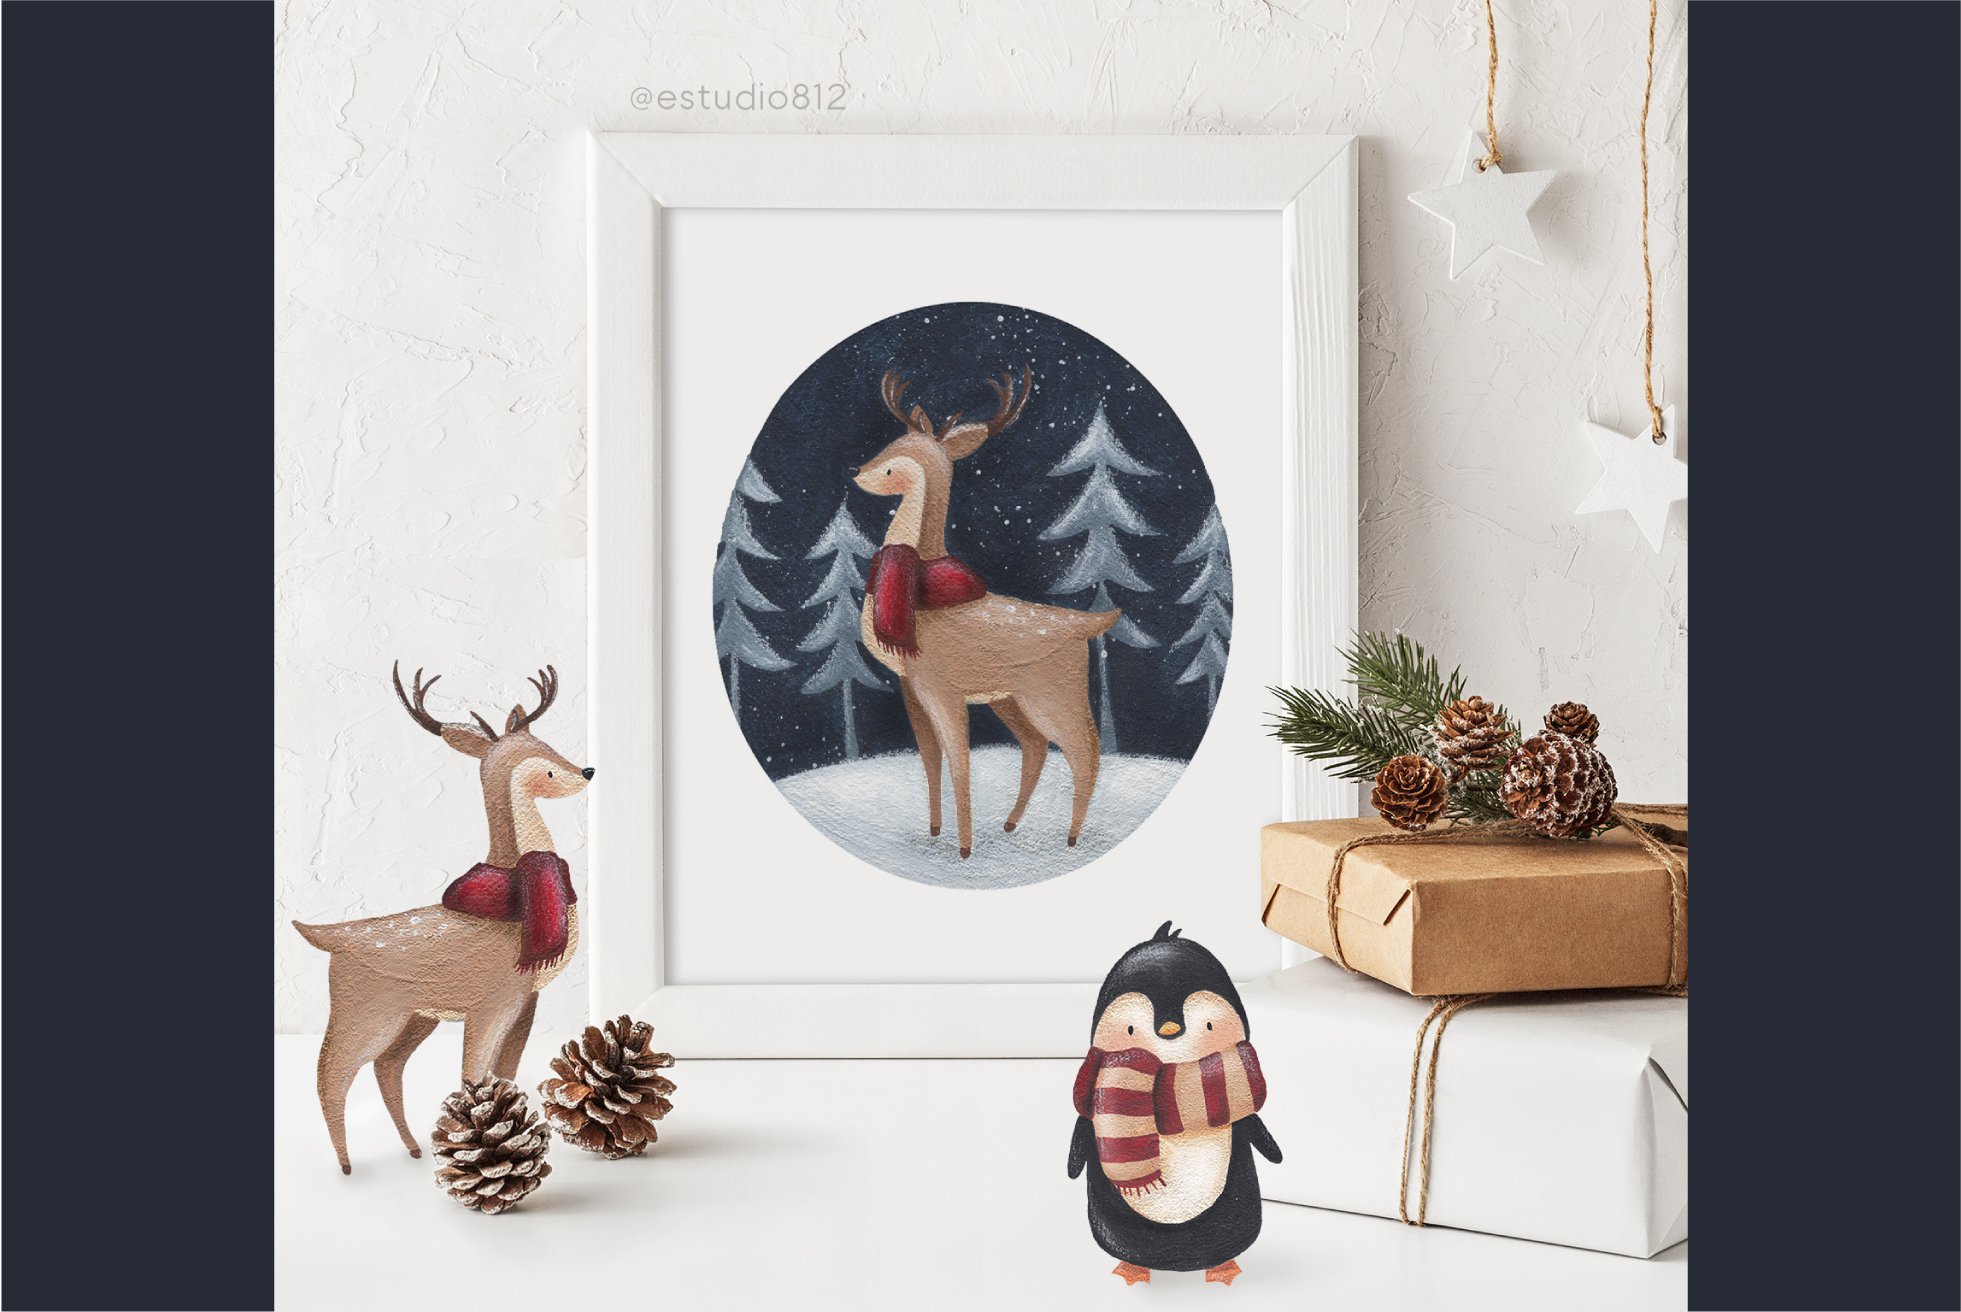 Nice minimalistic Christmas poster with a deer.